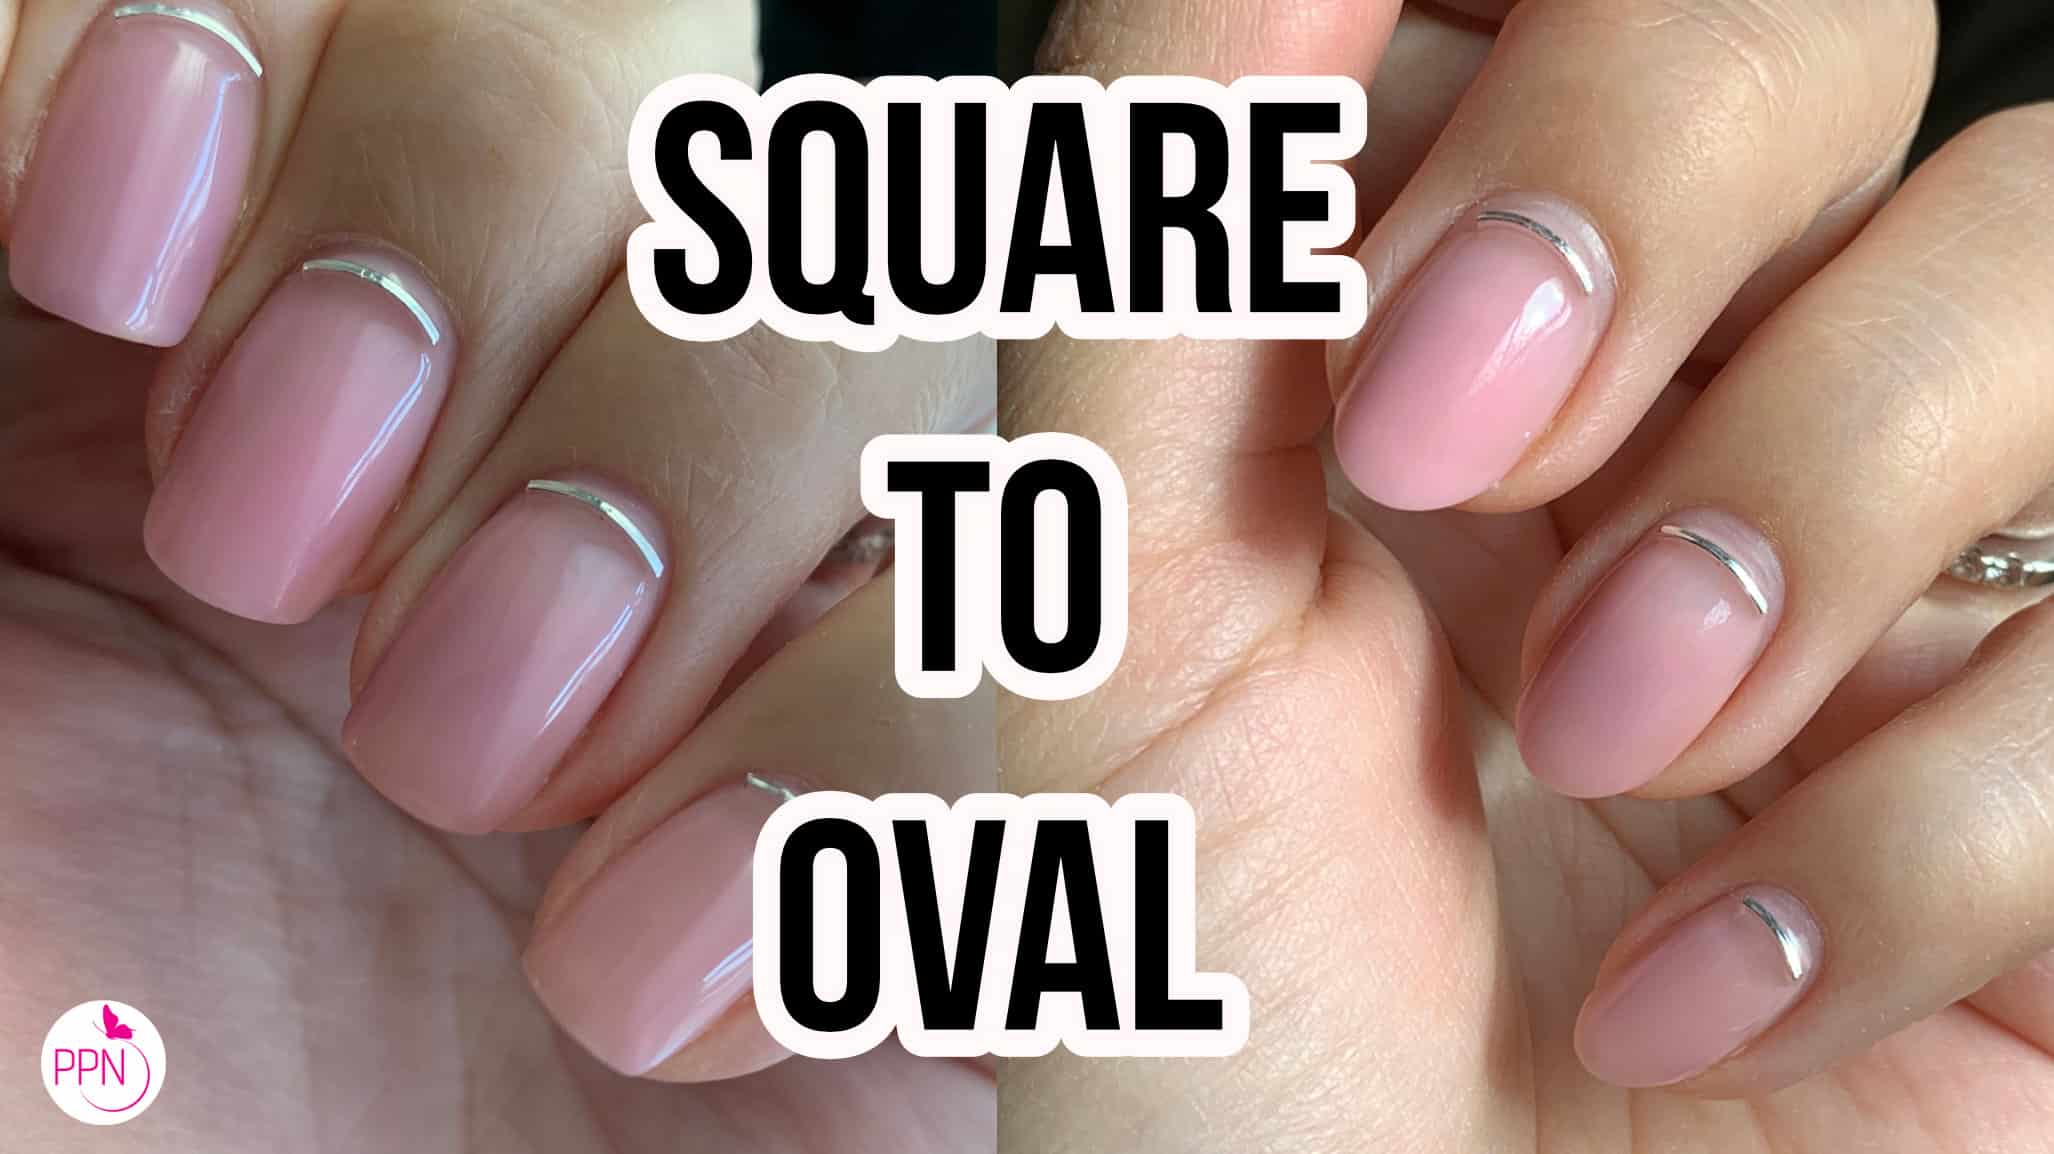 How To File Your Nails Square! NATURAL NAILS - YouTube